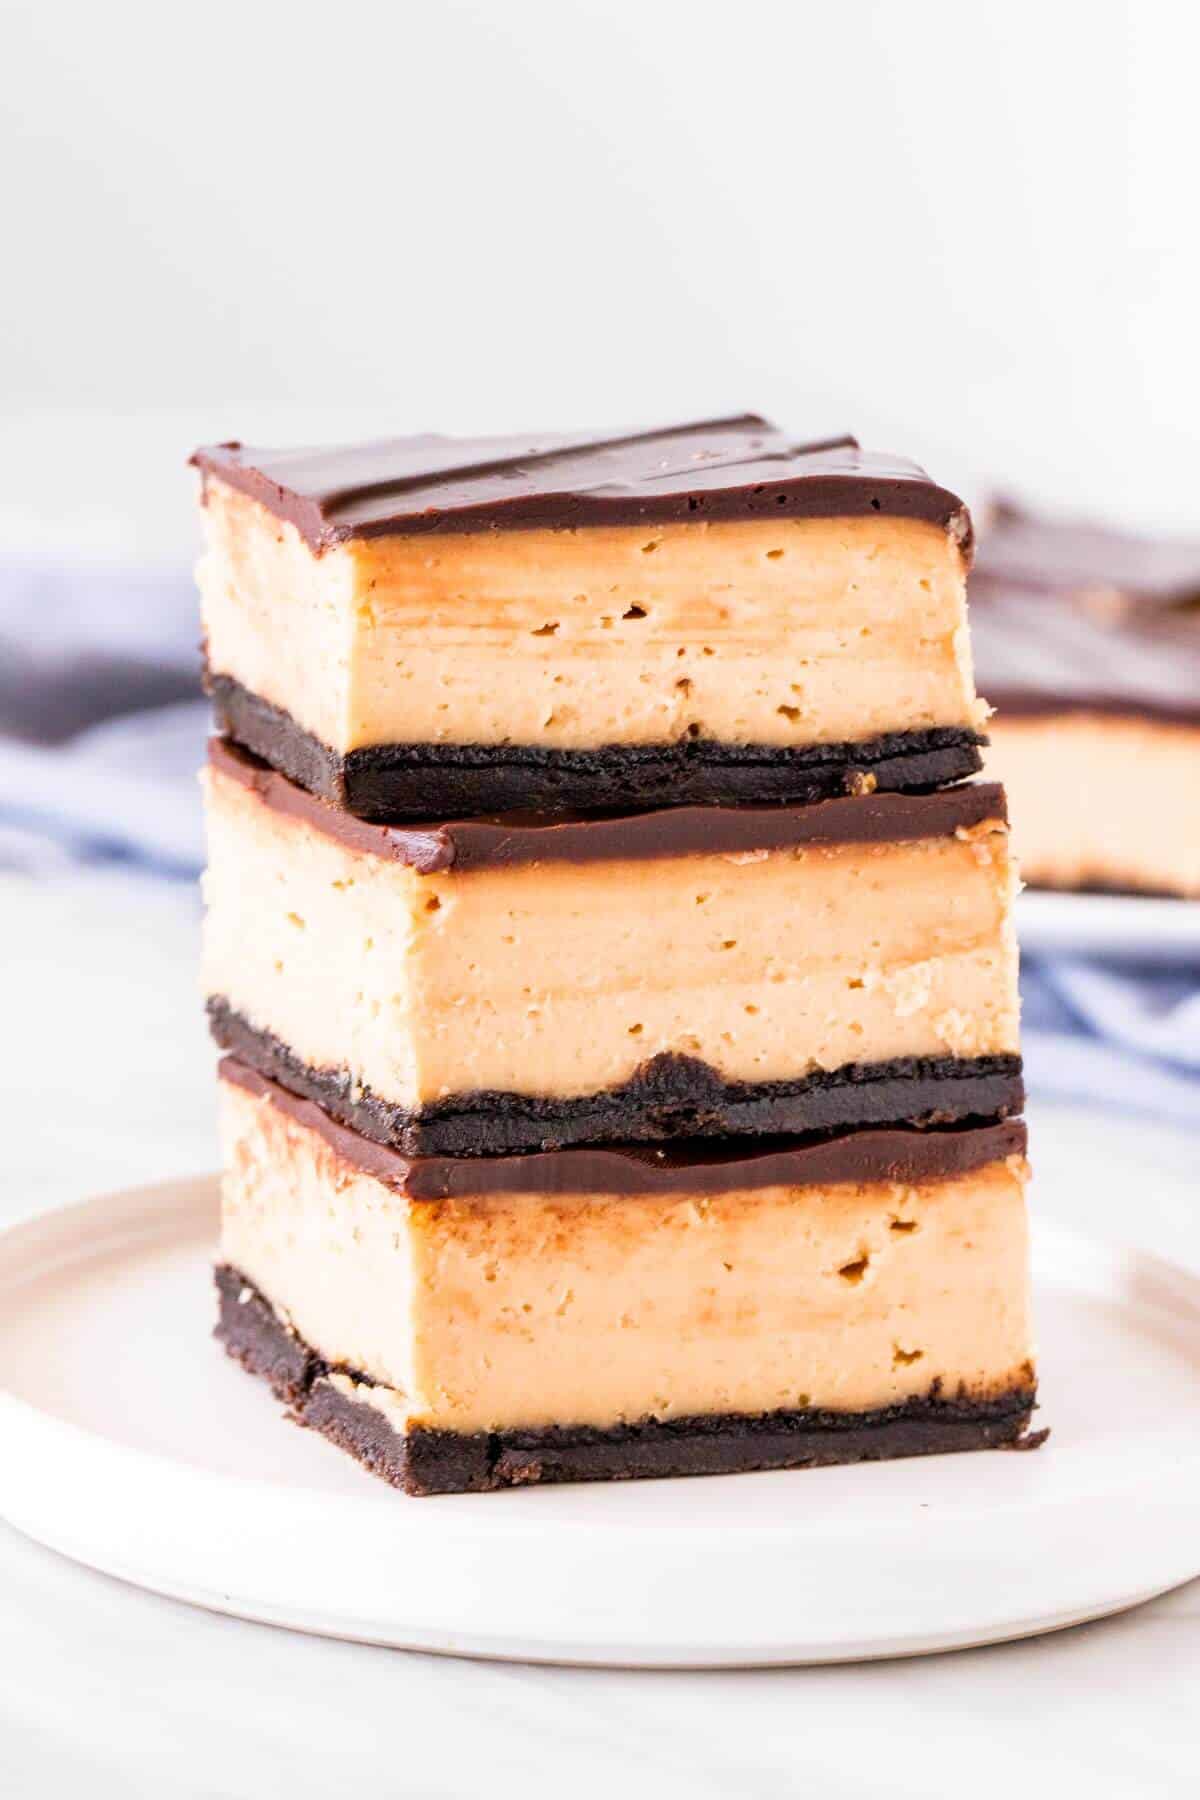 Stack of 3 peanut butter cheesecake bars with Oreo crust and chocolate topping.